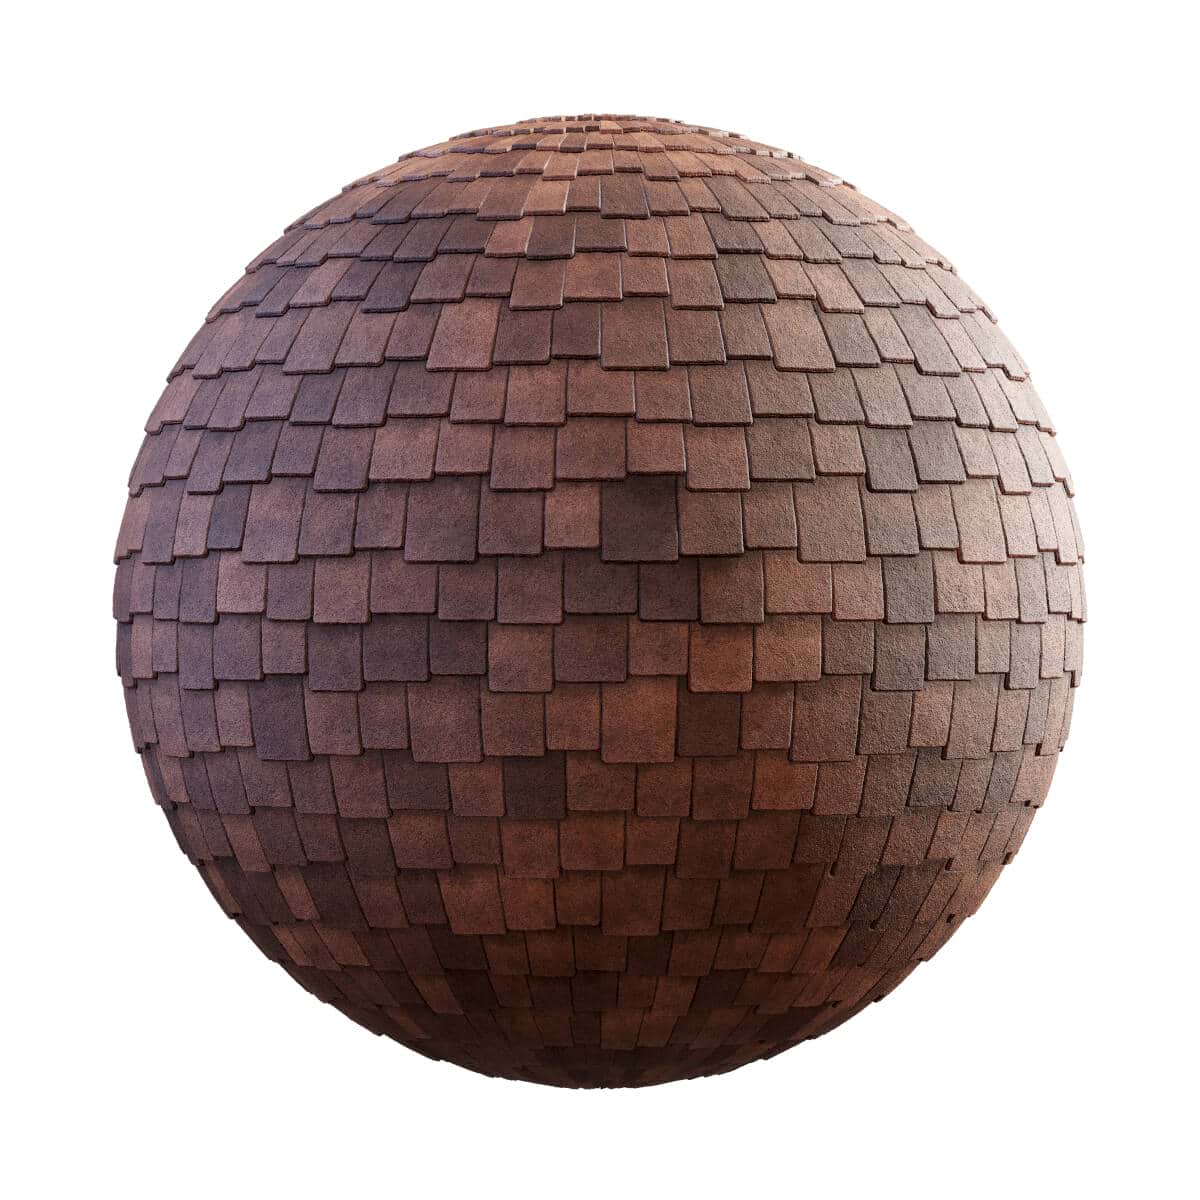 Brown Shingle Roof PBR Texture